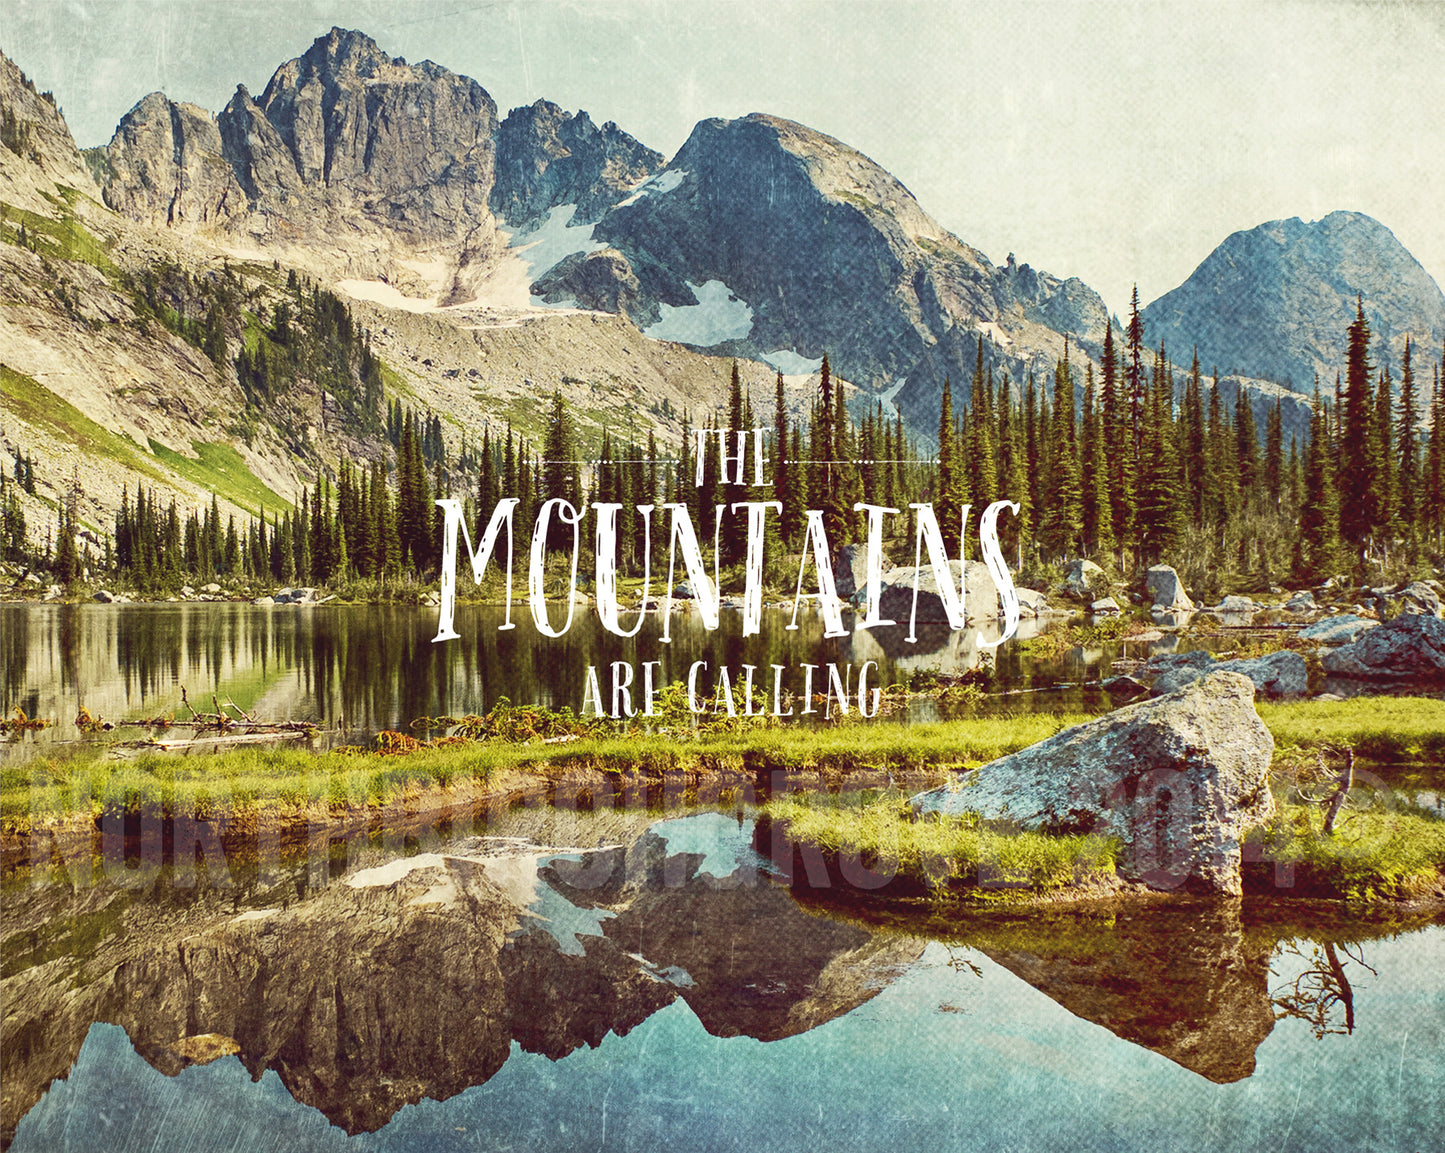 The Mountains Are Calling <br>Valhalla Provincial Park B.C <br> Limited Release Archival Fine Art Print